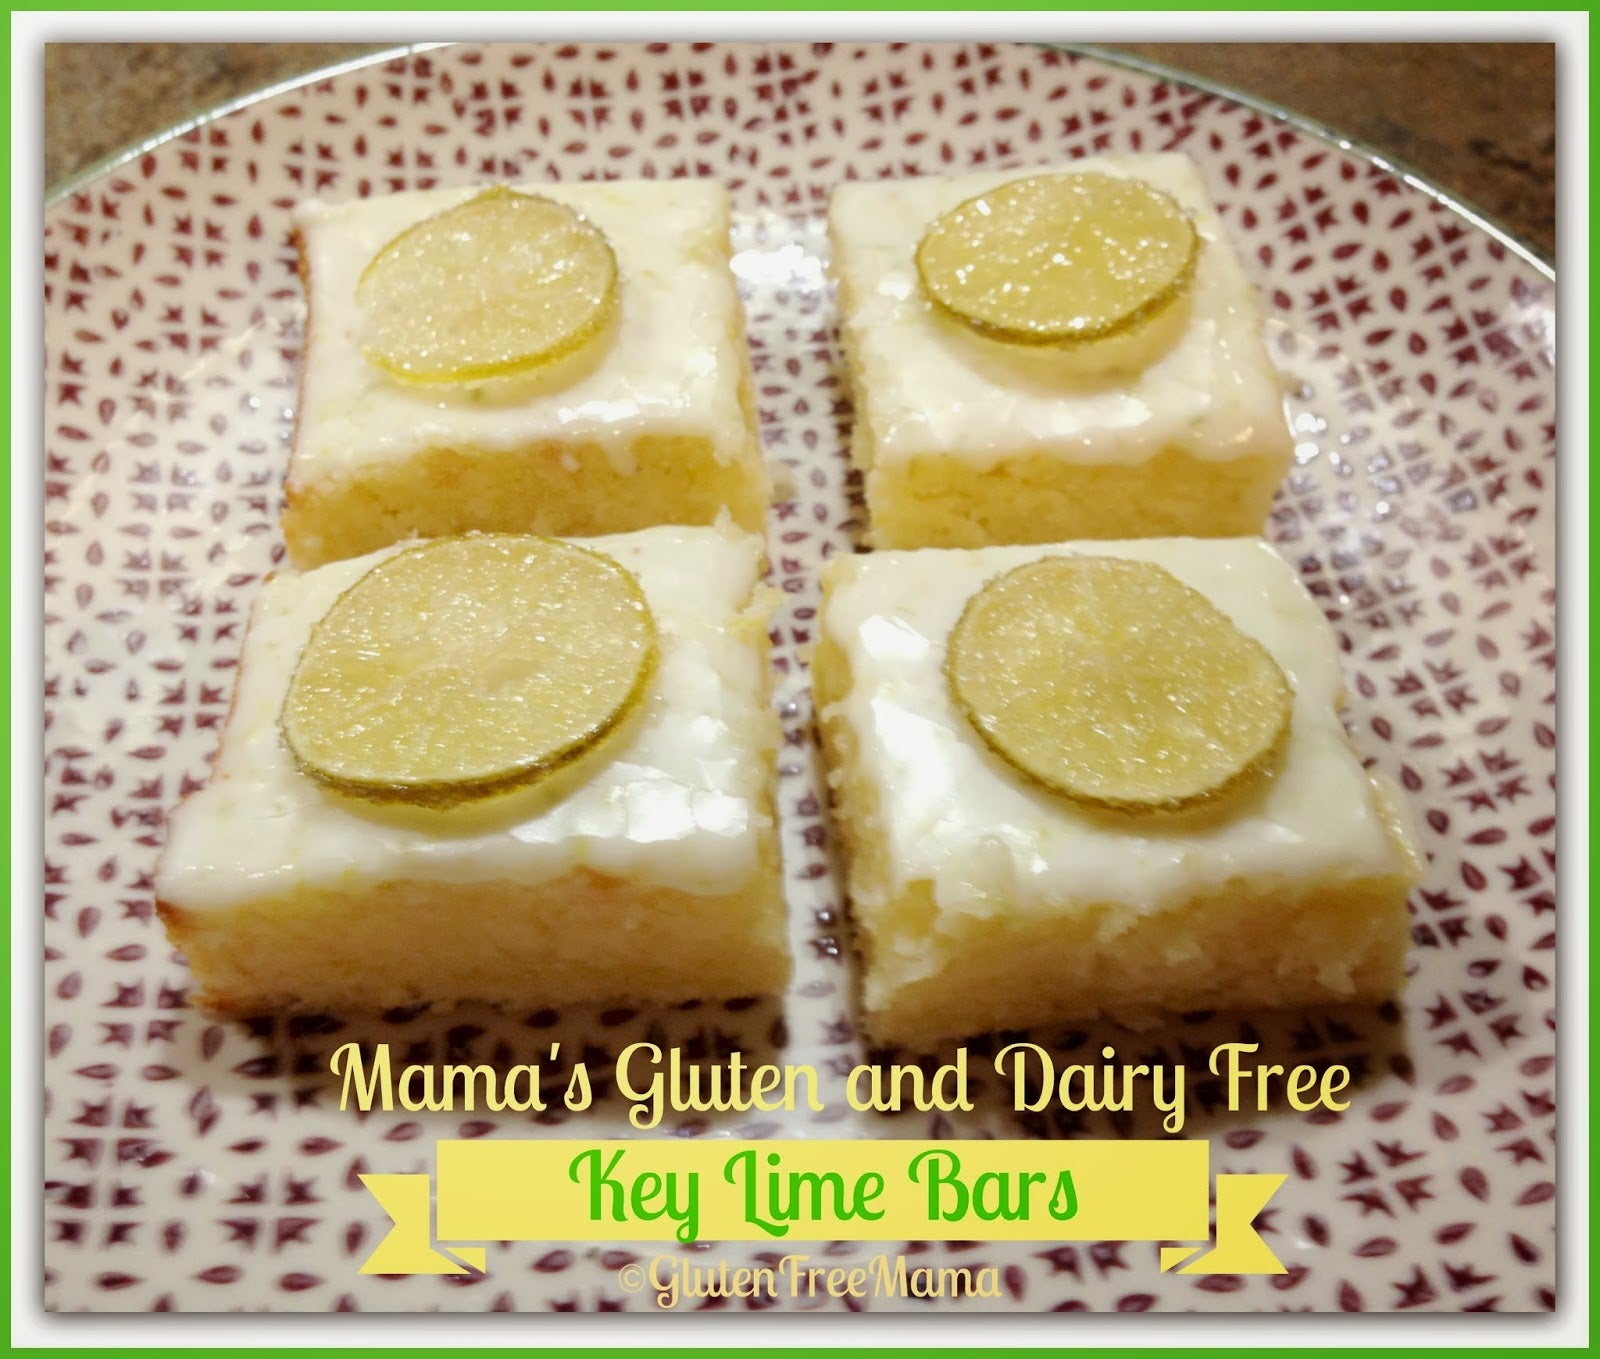 Key Lime Bars with Candied Key Limes ~ Gluten Free and Dairy Free